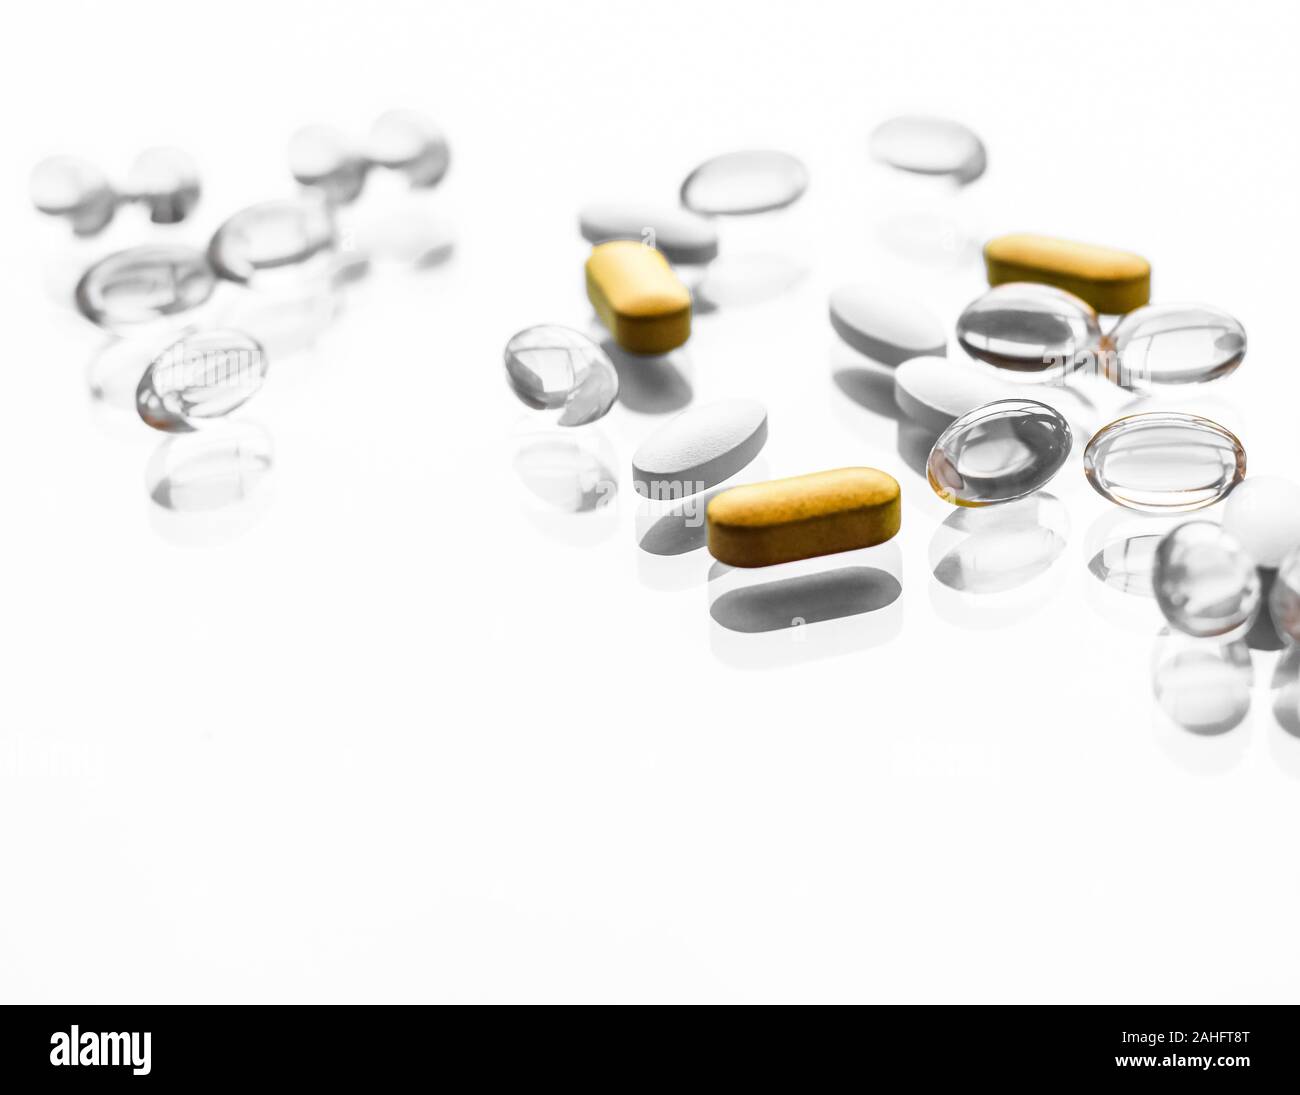 Pharma, branding and lab concept - Pills and capsules for diet nutrition, anti-aging beauty supplements, probiotic drugs, pill vitamins as medicine an Stock Photo